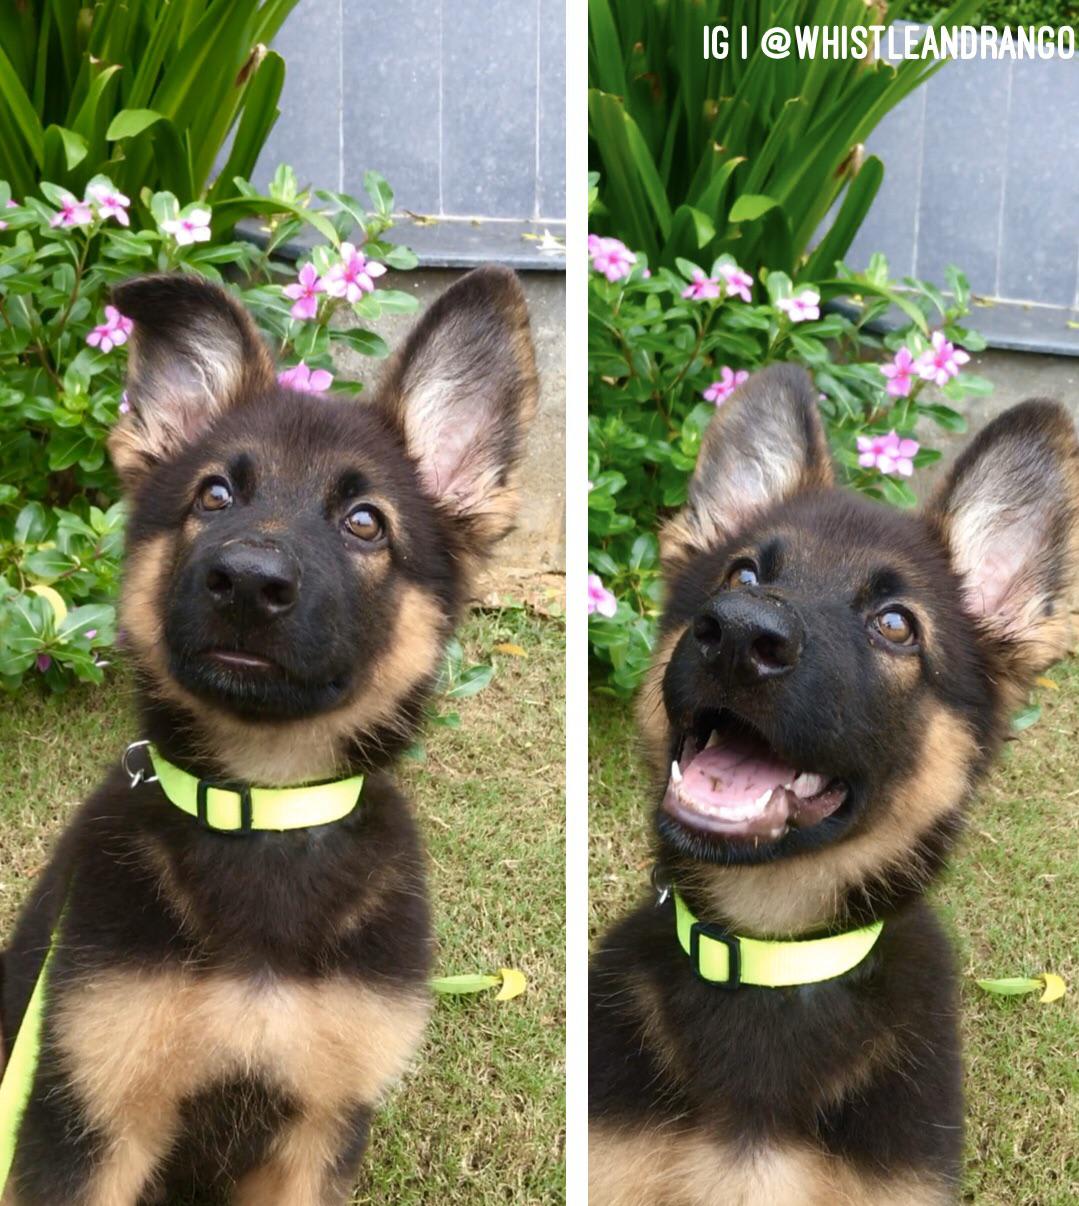 Before and after I told Rango that he’s a good boy.